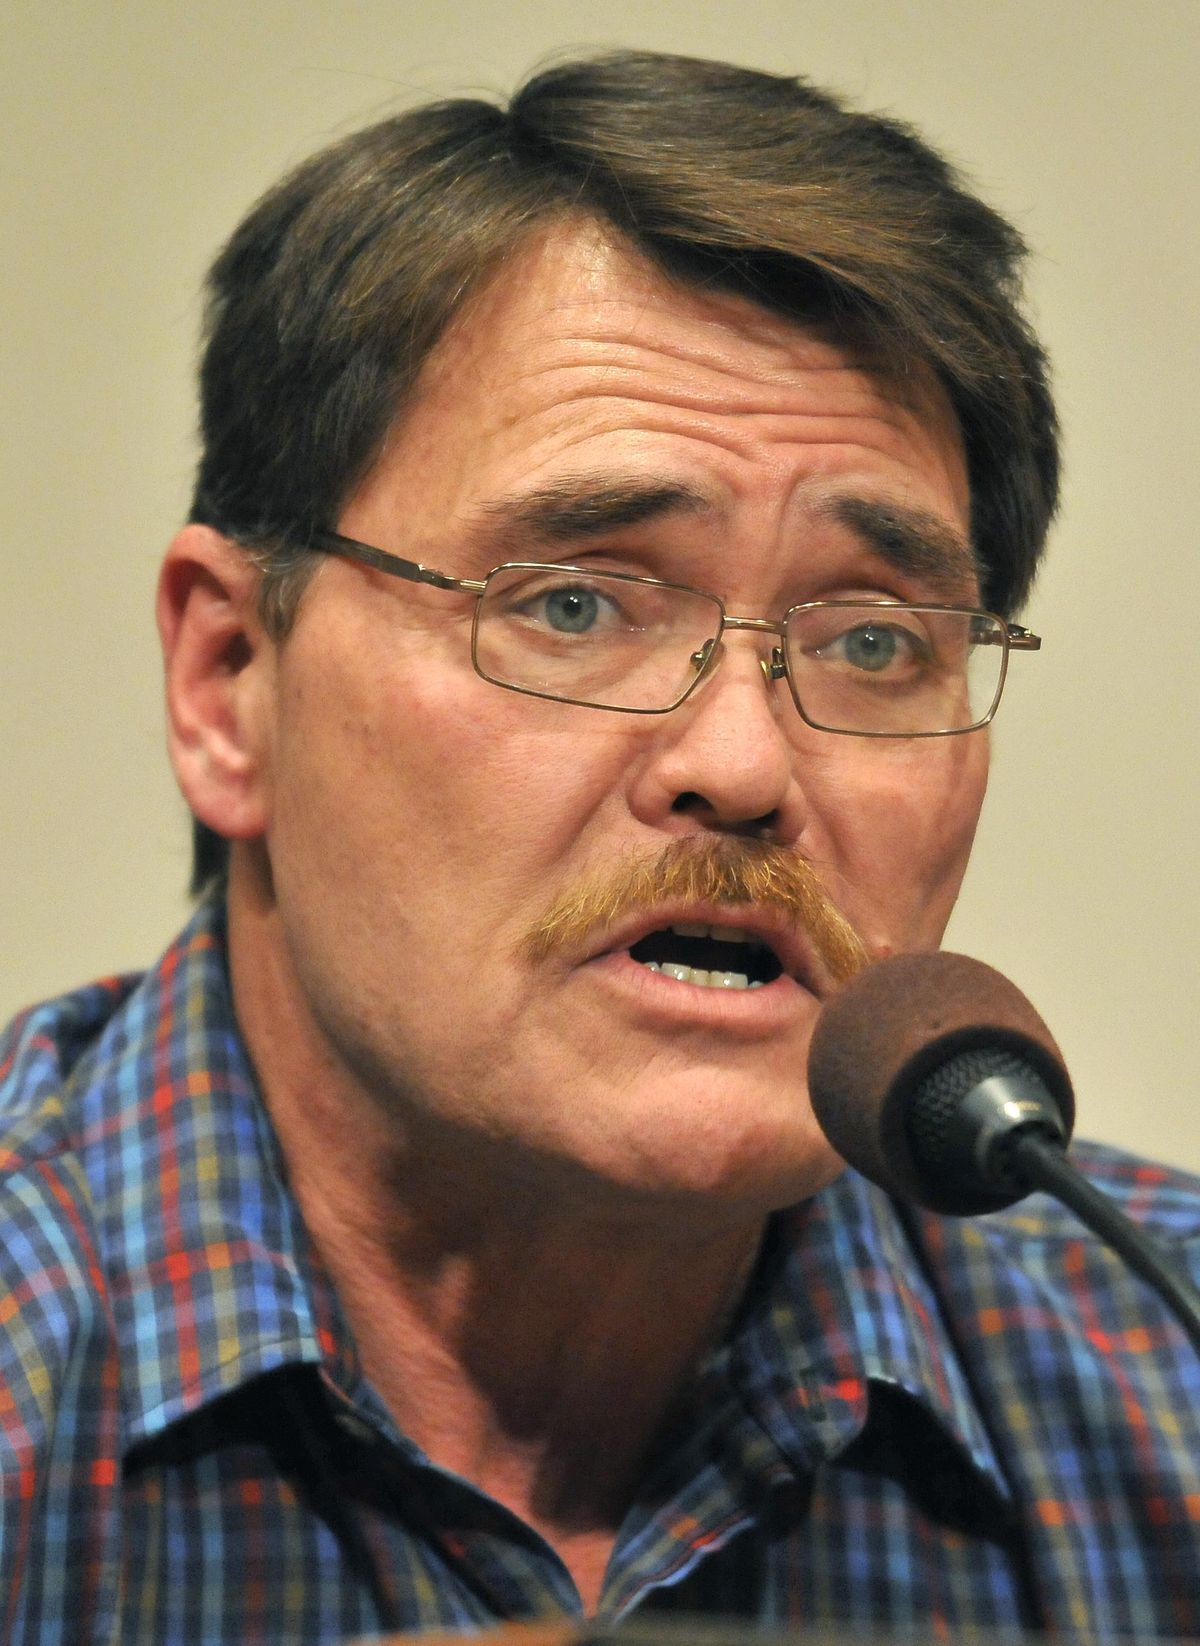 City Councilman Mike Fagan urged residents Tuesdays to read up on theories of jet engines releasing harmful chemicals into the air, widely regarded as a conspiracy theory among academics. Fagan said he wasn’t certain it was happening, but was skeptical of the government’s swift denials. (Jesse Tinsley / The Spokesman-Review)